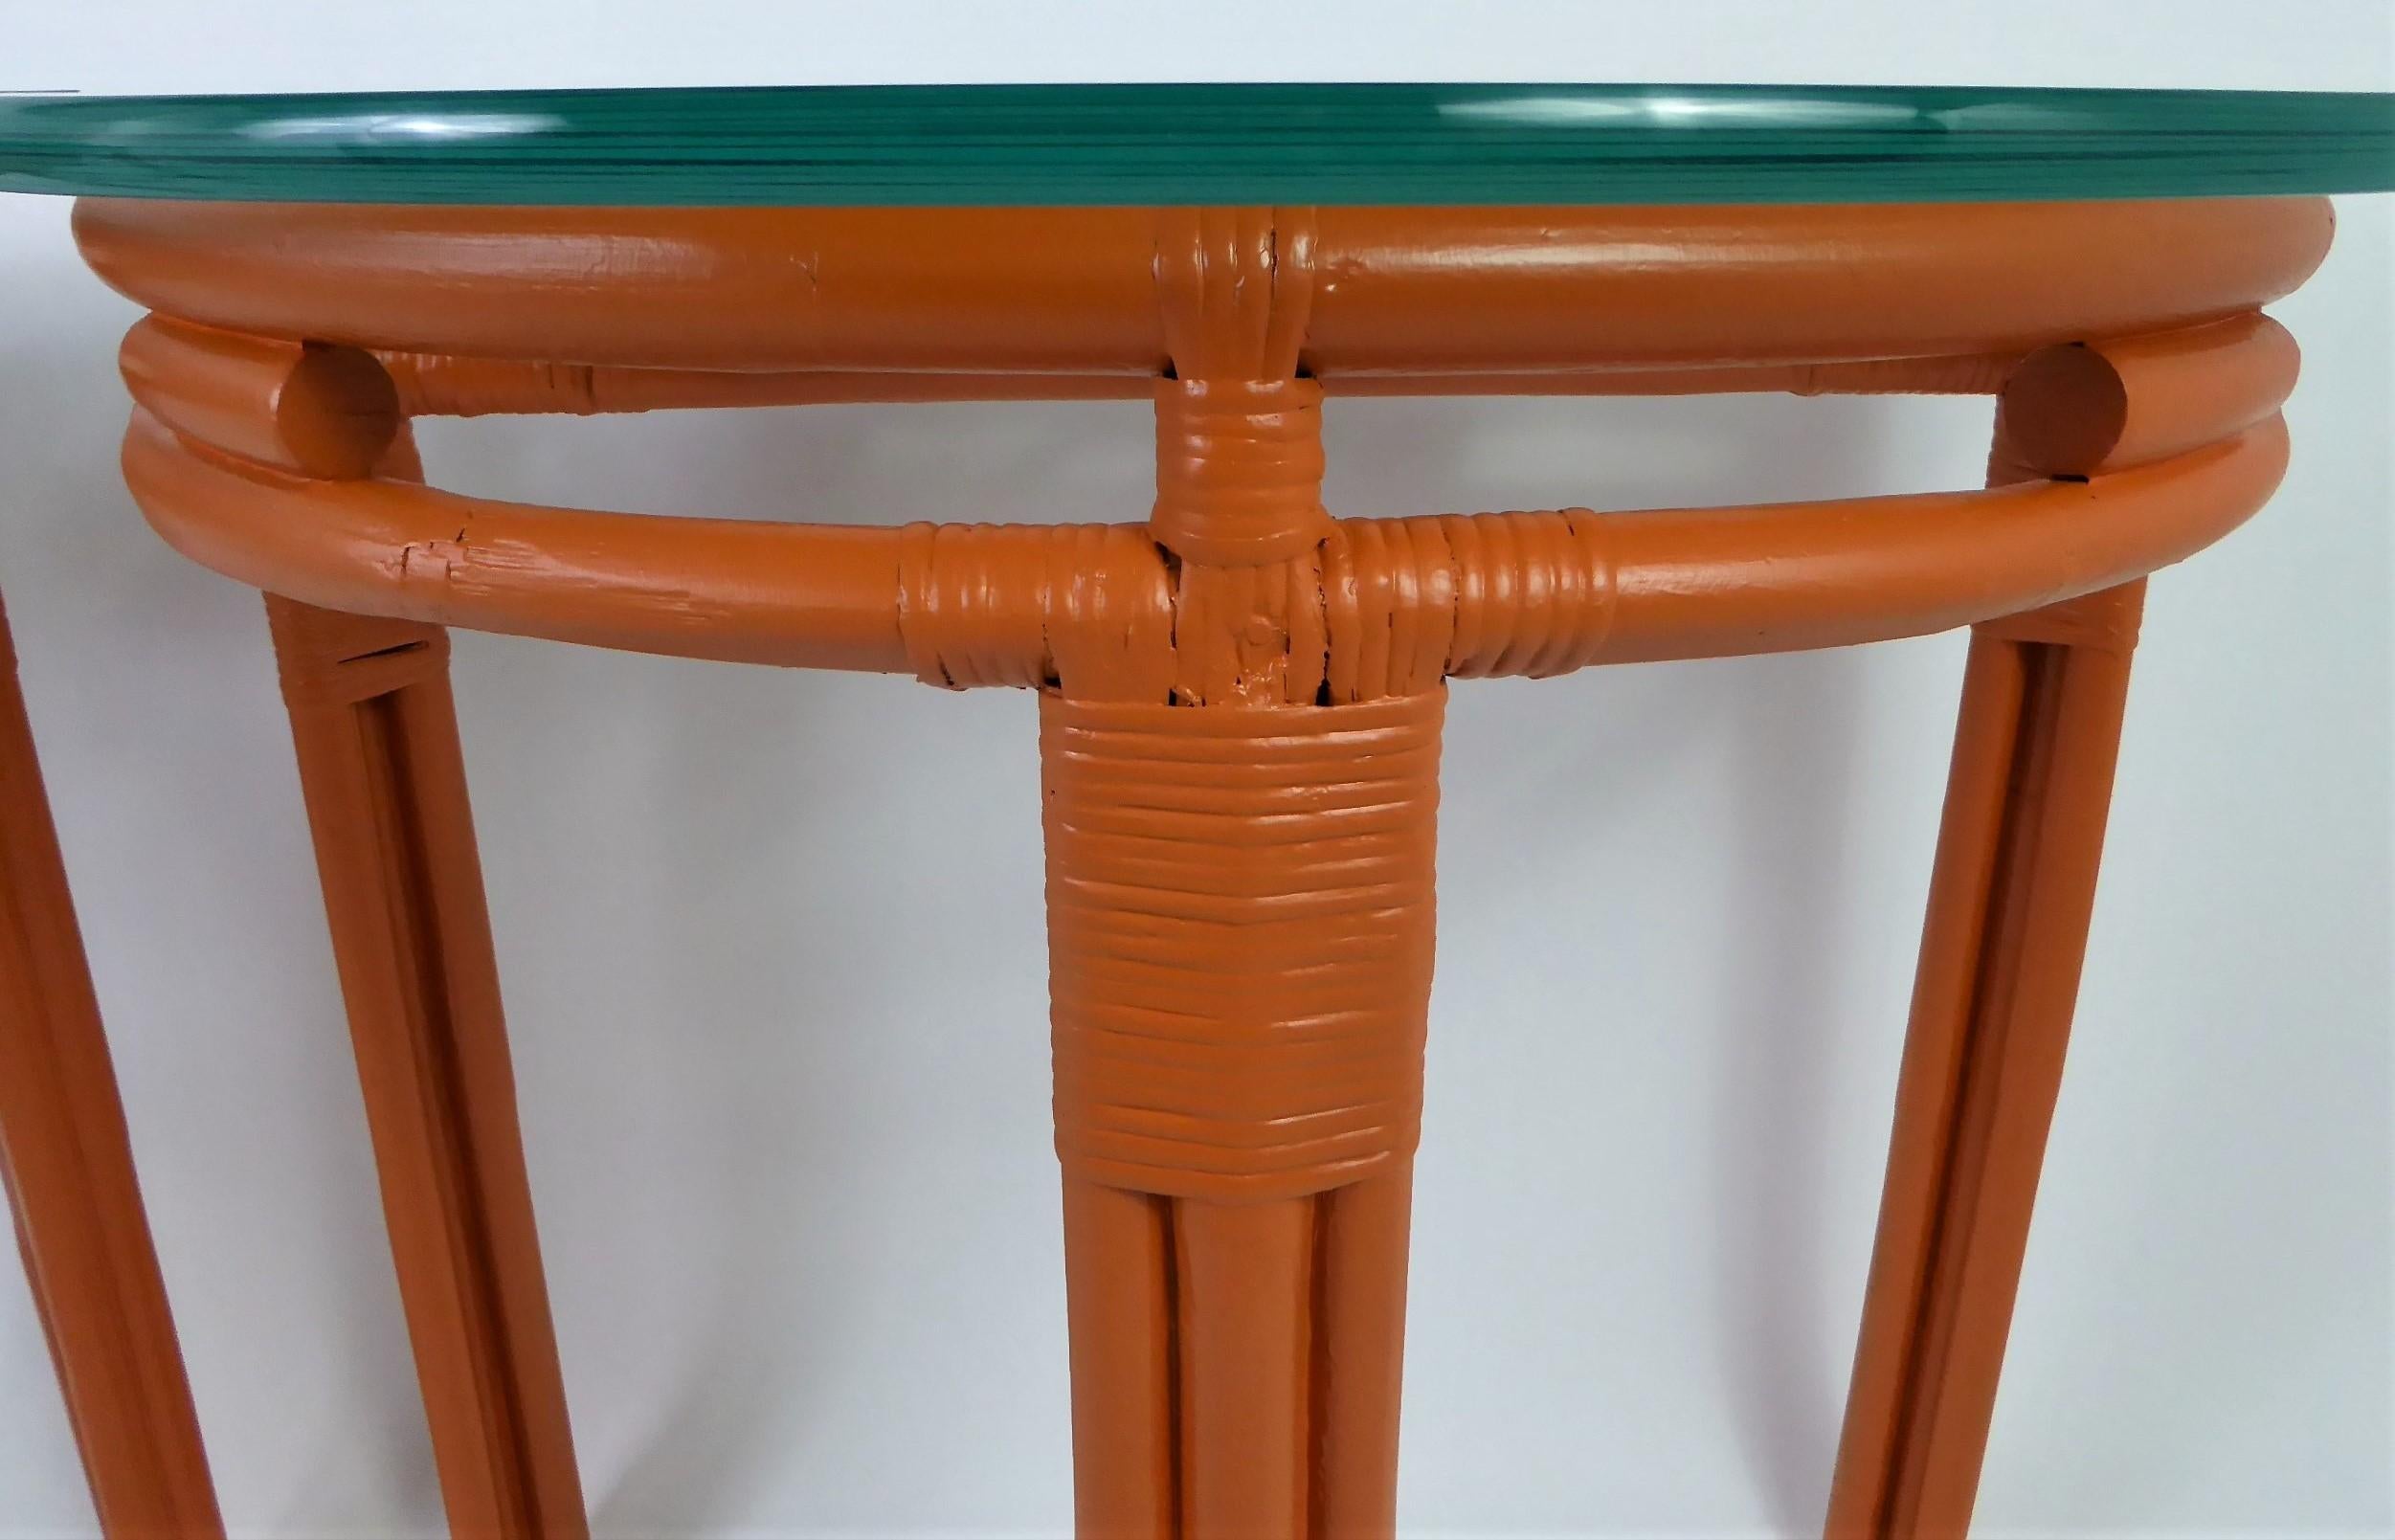 1940s Painted Rattan Demilune Glass Top Consoles in Hermes Orange 11